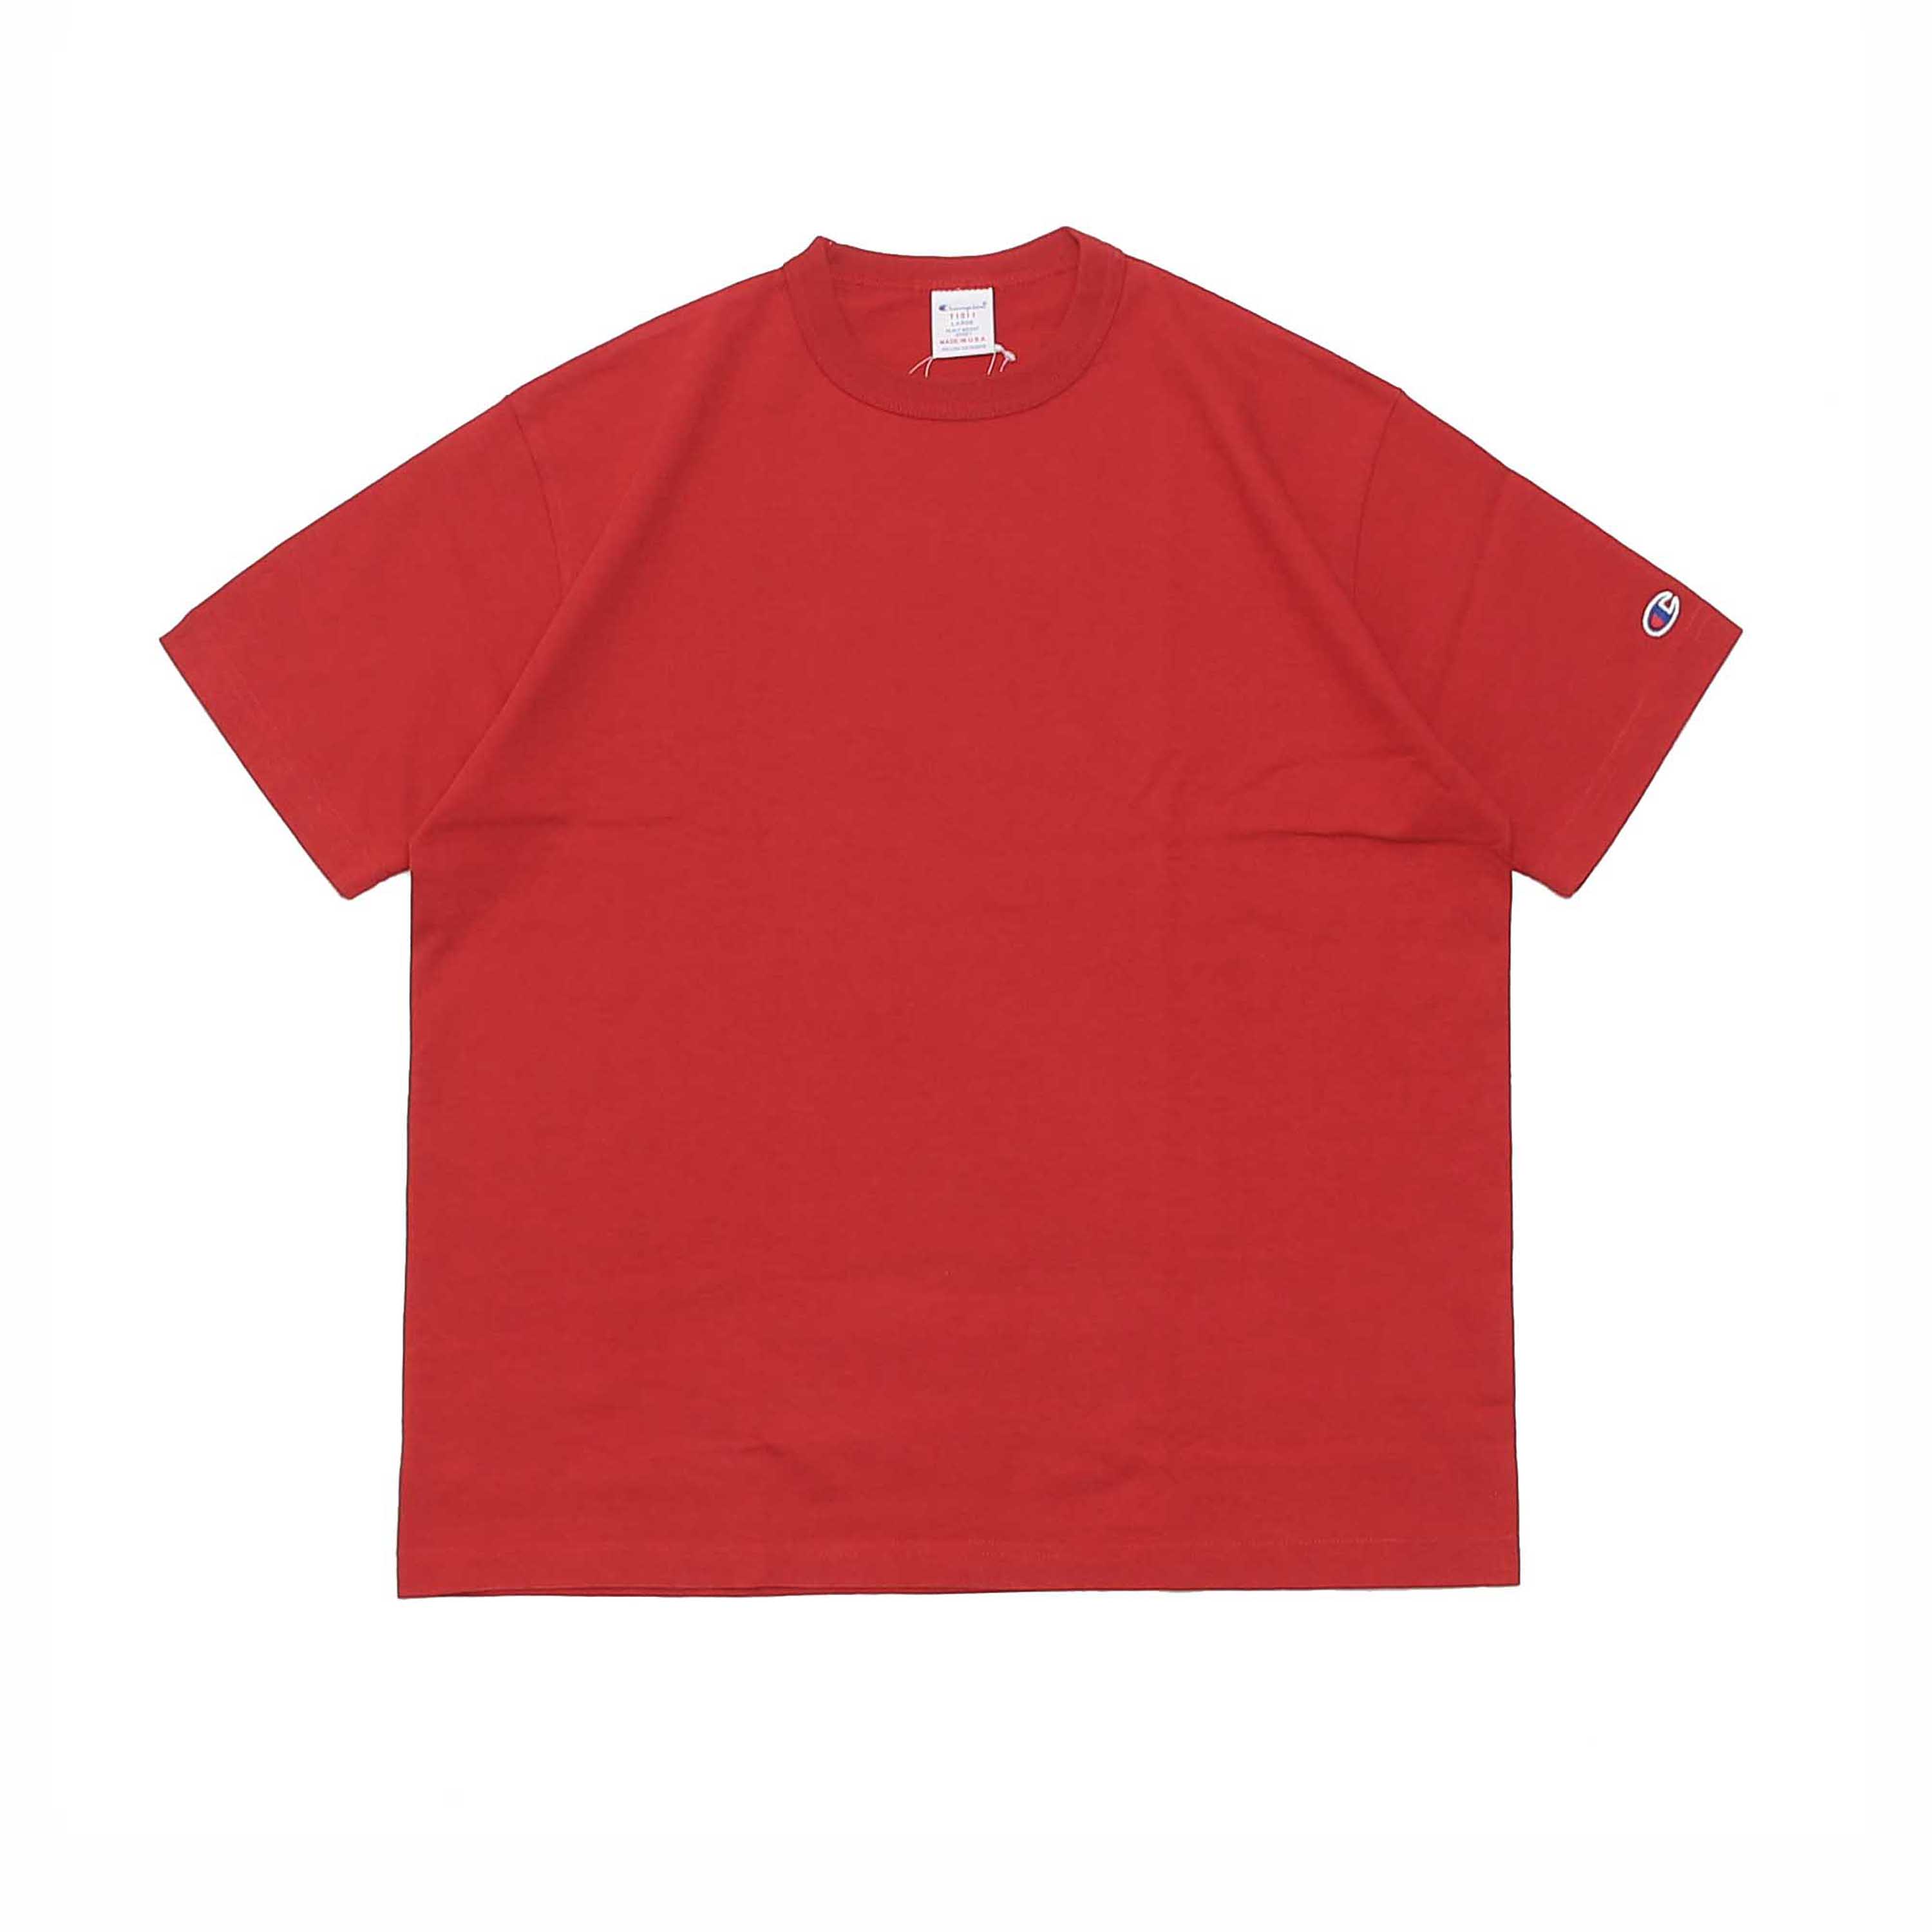 T1011 S/S PLAIN TEE - RED